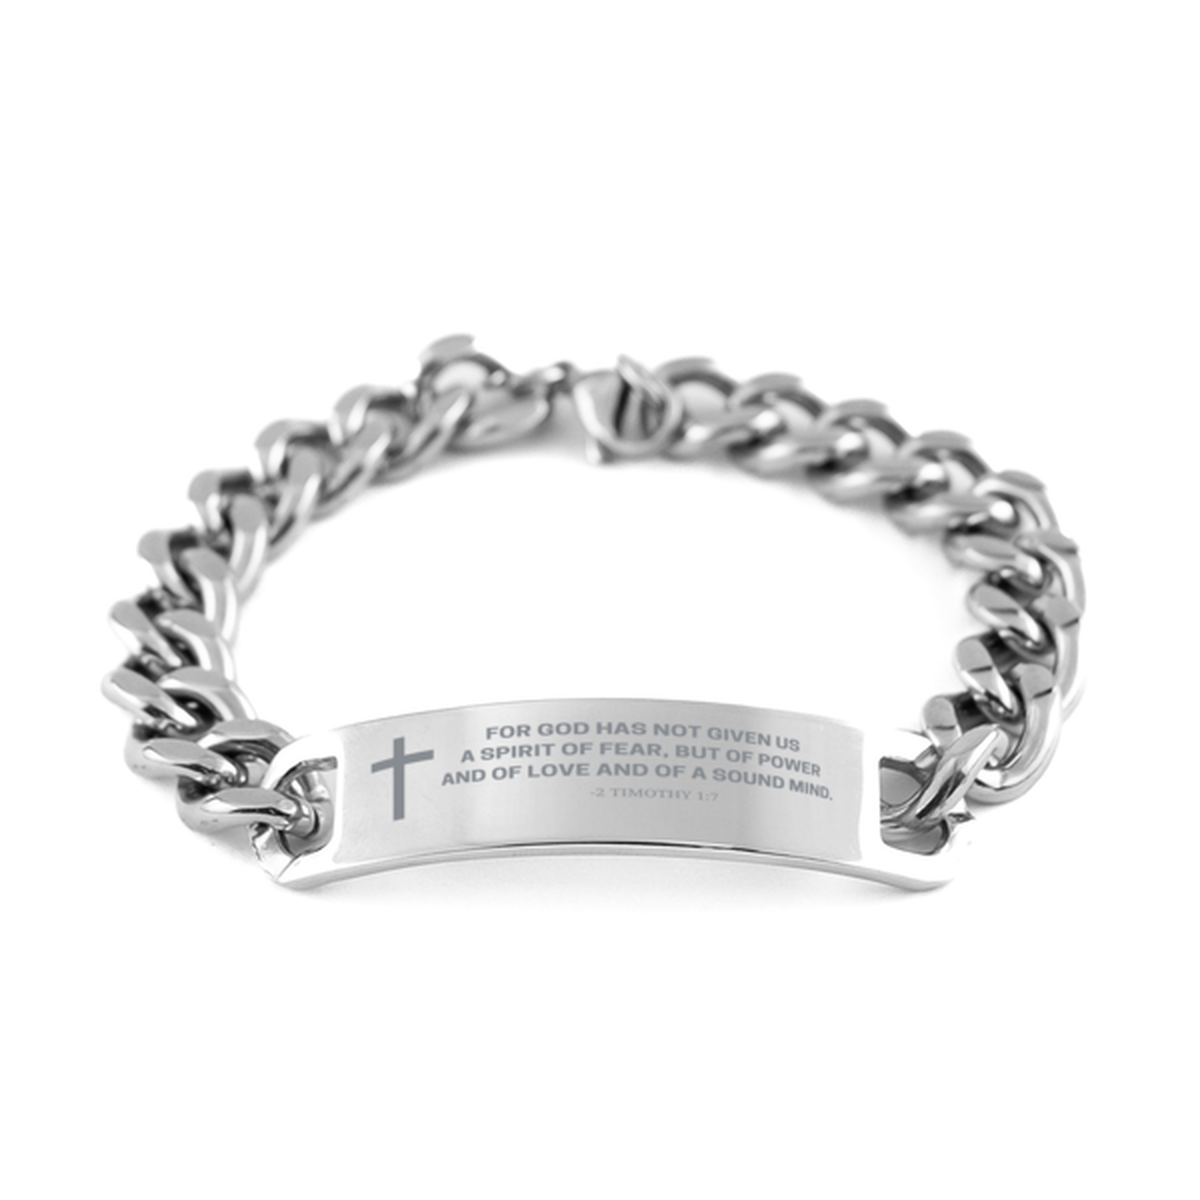 Baptism Gifts For Teenage Boys Girls, Christian Bible Verse Cuban Chain Bracelet, For God has not given us, Catholic Confirmation Gifts for Son, Godson, Grandson, Nephew